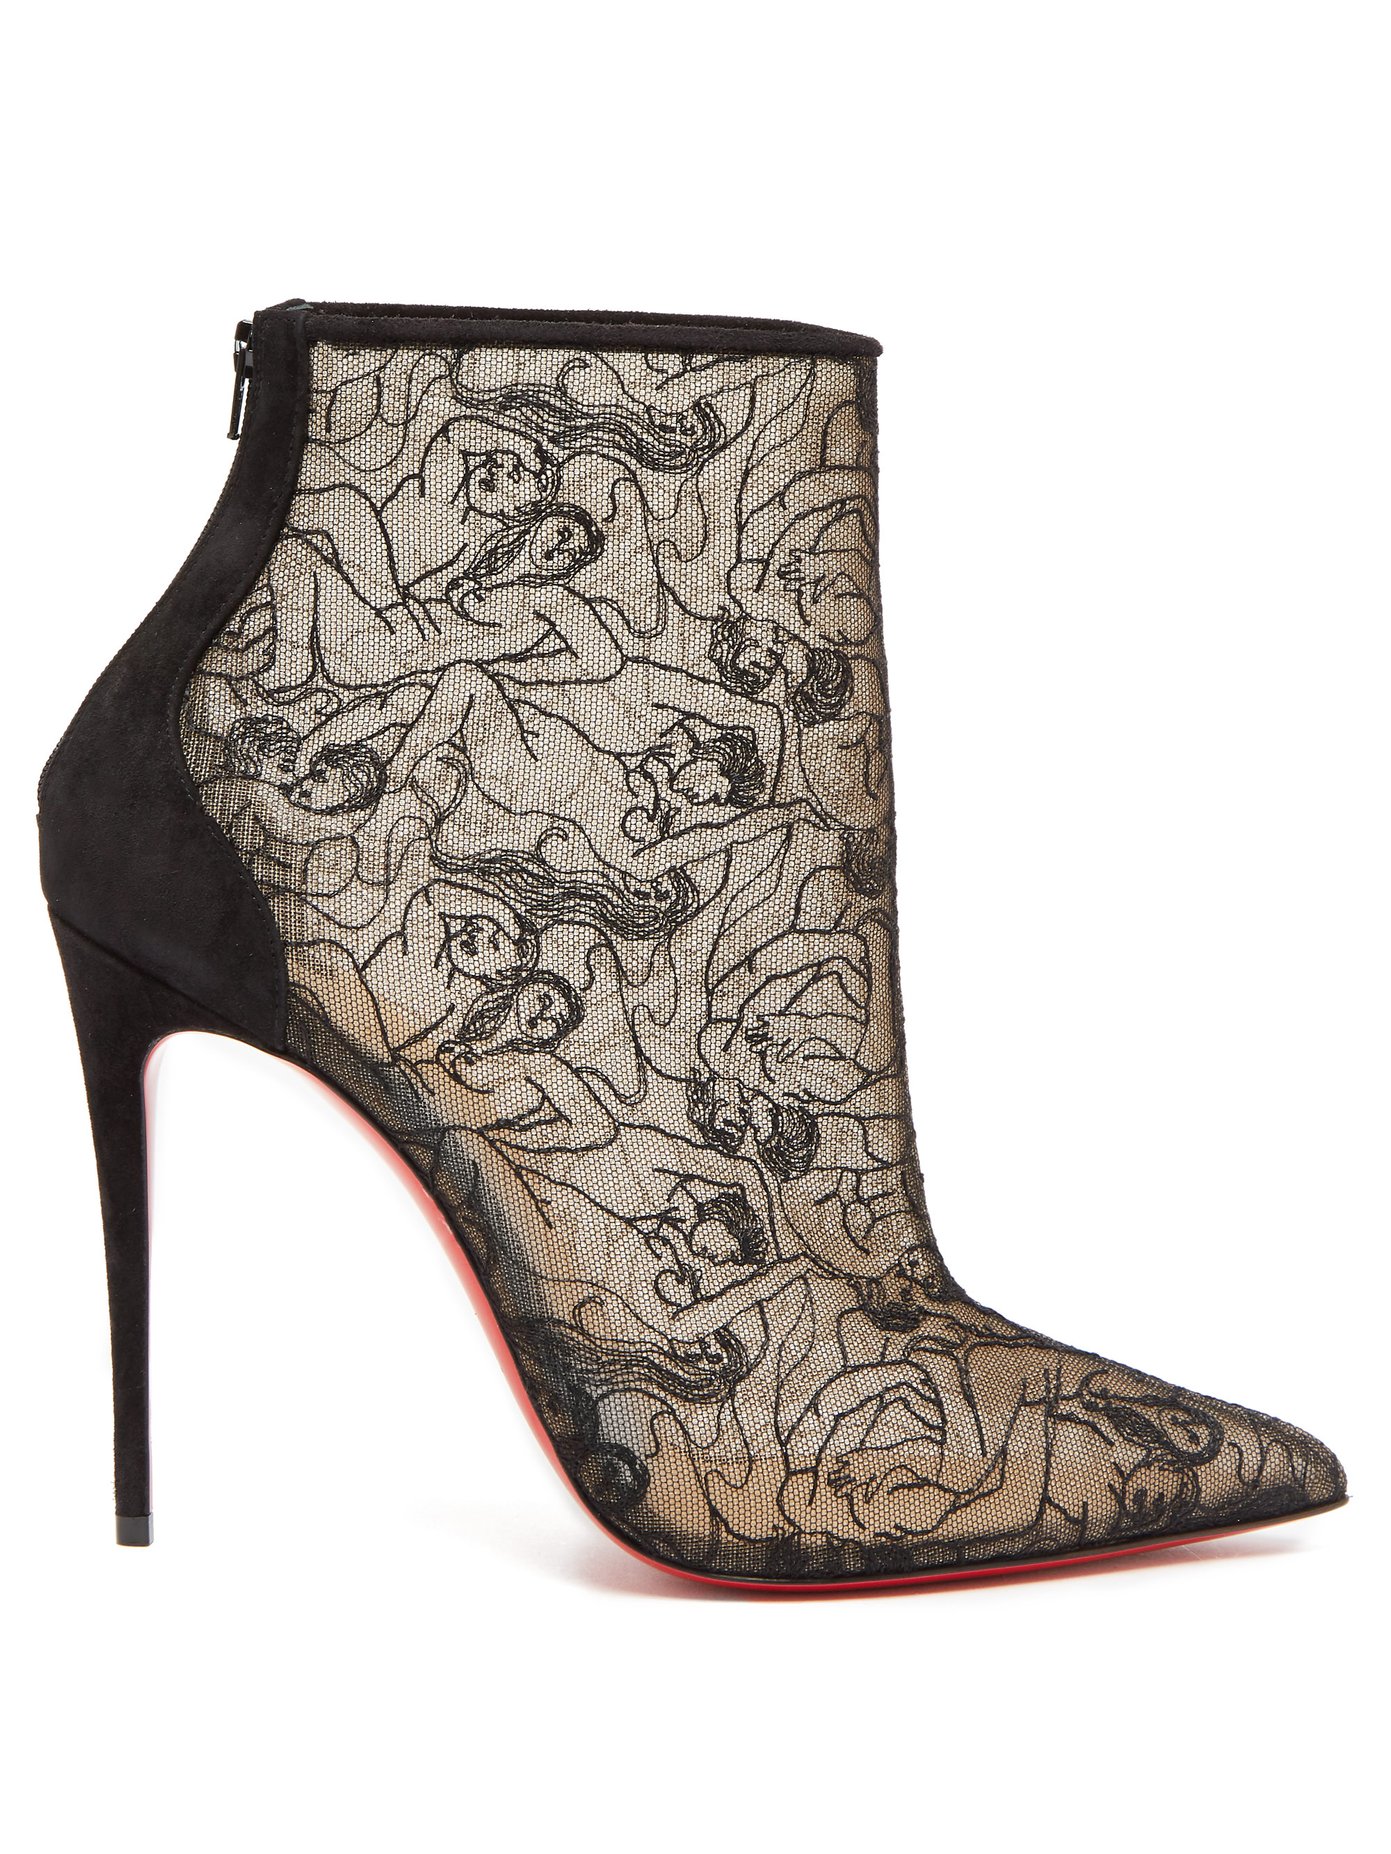 embroidered ankle boots uk